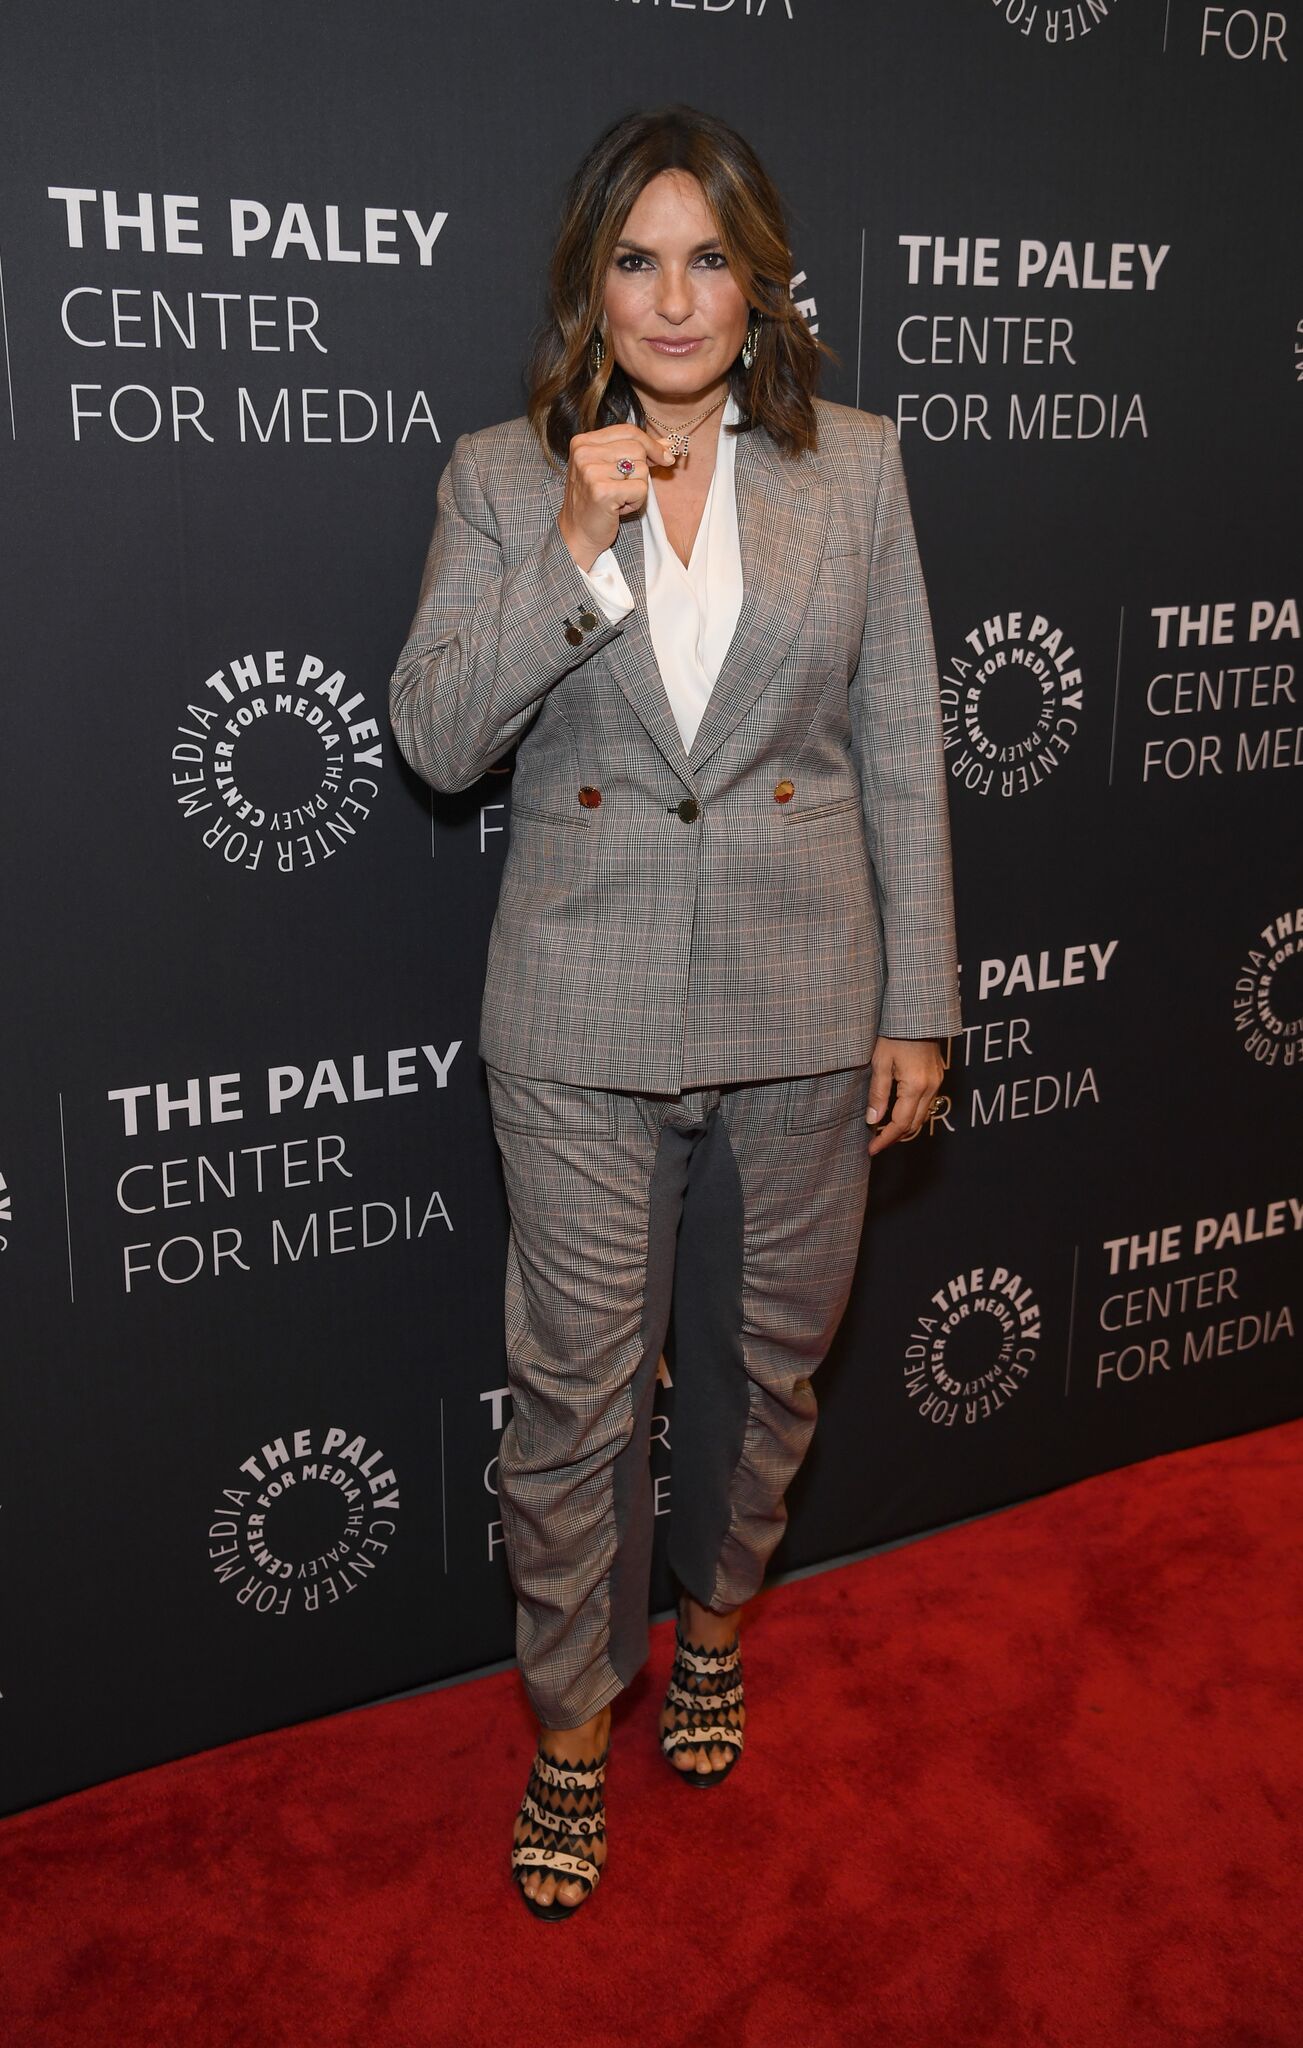  Mariska Hargitay attends the "Law & Order: SVU" Television Milestone Celebration at The Paley Center for Media  | Getty Images